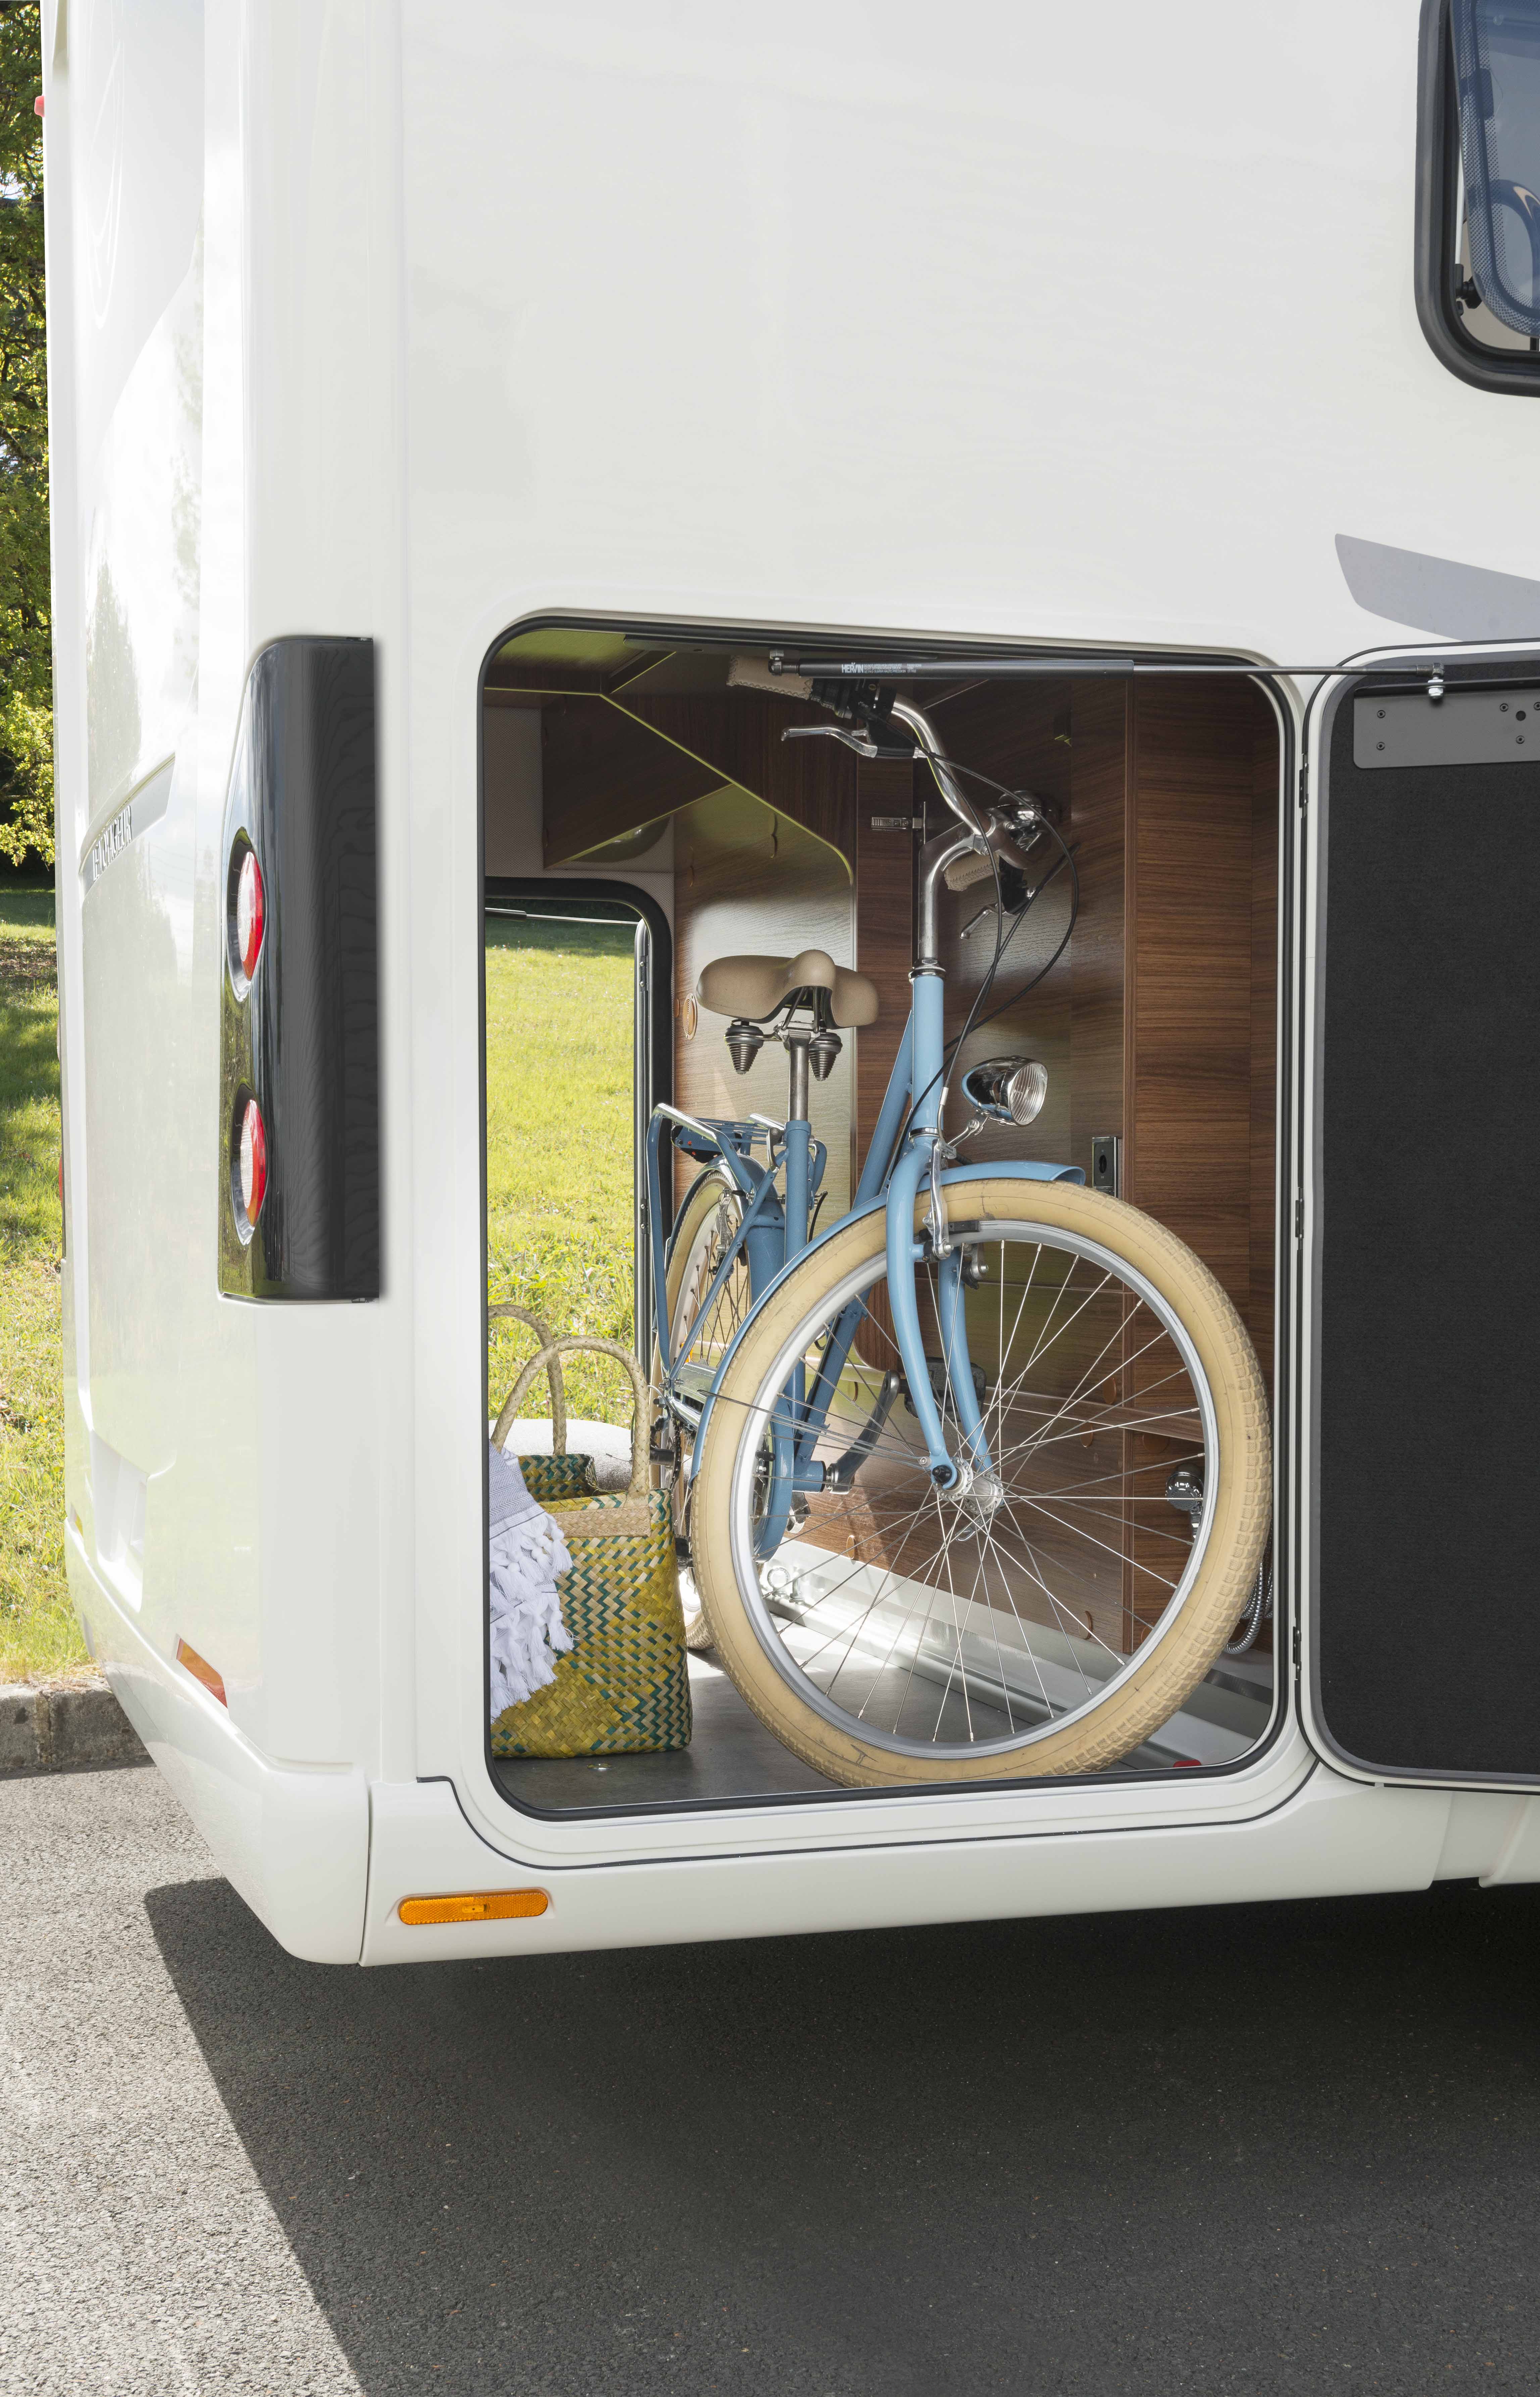 Convenient transport of bicycles and motorbikes in the motorhome – main image